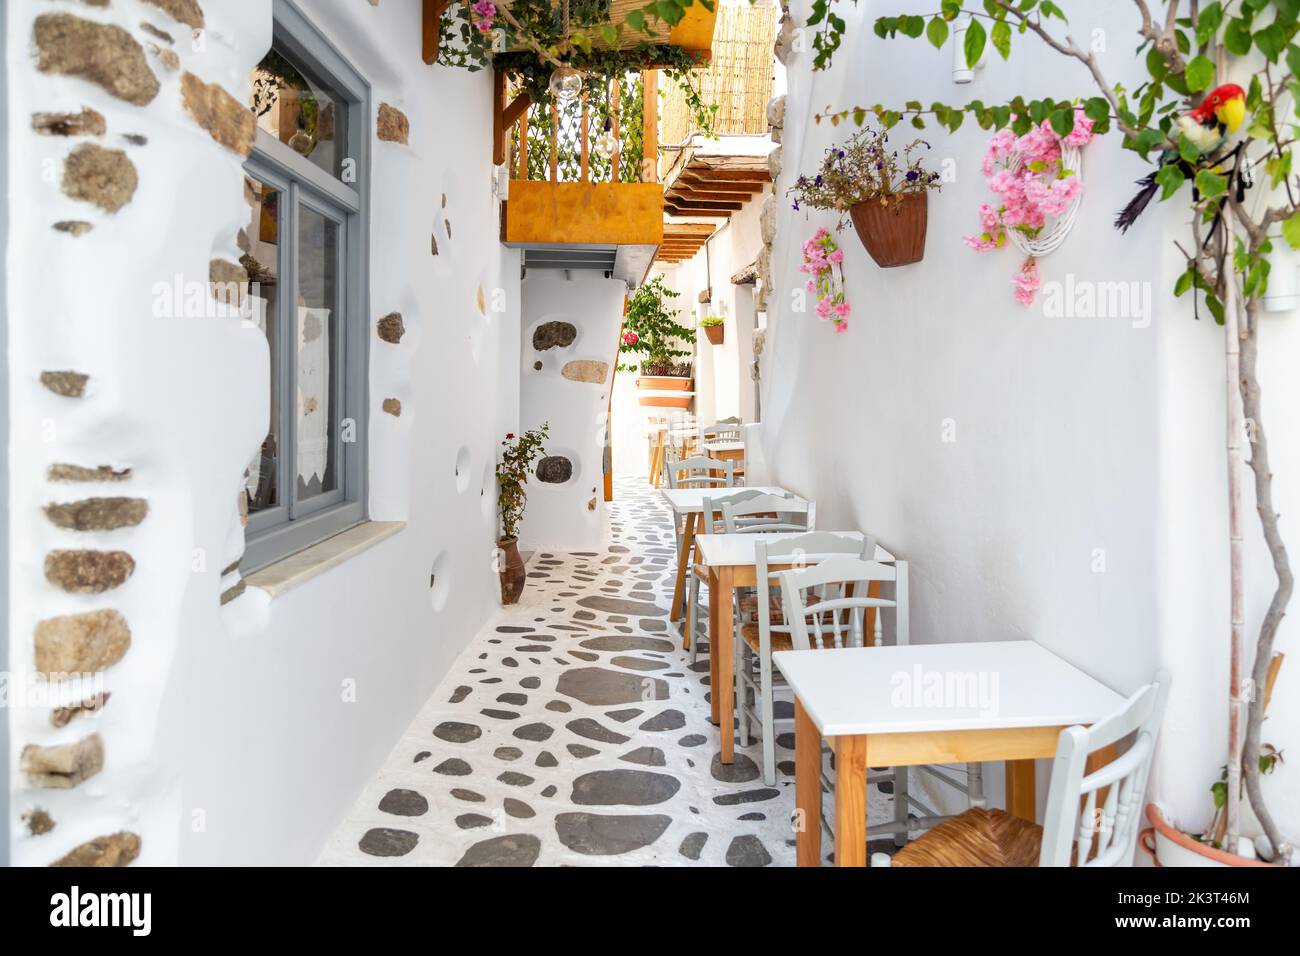 Naxos island, Cyclades Greece. Traditional outdoors cafe, wooden chair and table on cobblestone street. Whitewashed wall, plants around. Summer holida Stock Photo